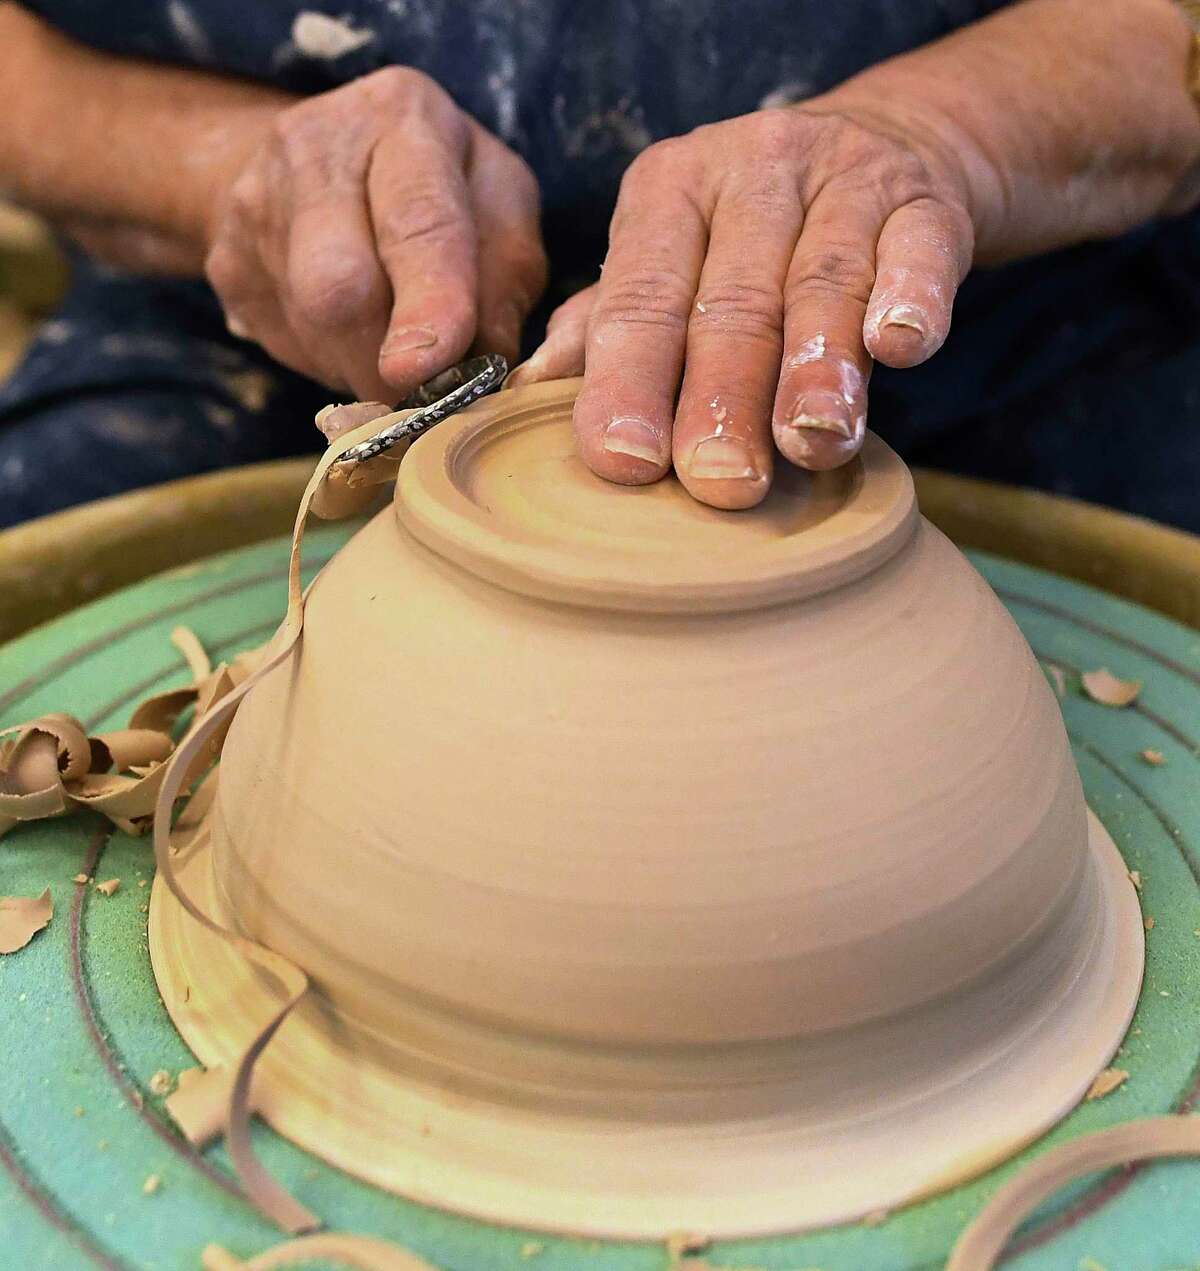 Alice Smrcka traveled from Norman, Okla. to create bowls to be sold at the annual Empty Bowls event at the Southwest School of Art on Saturday, Jan. 11, 2020. The event, which benefits SAMMinistries, will be held on March 1.